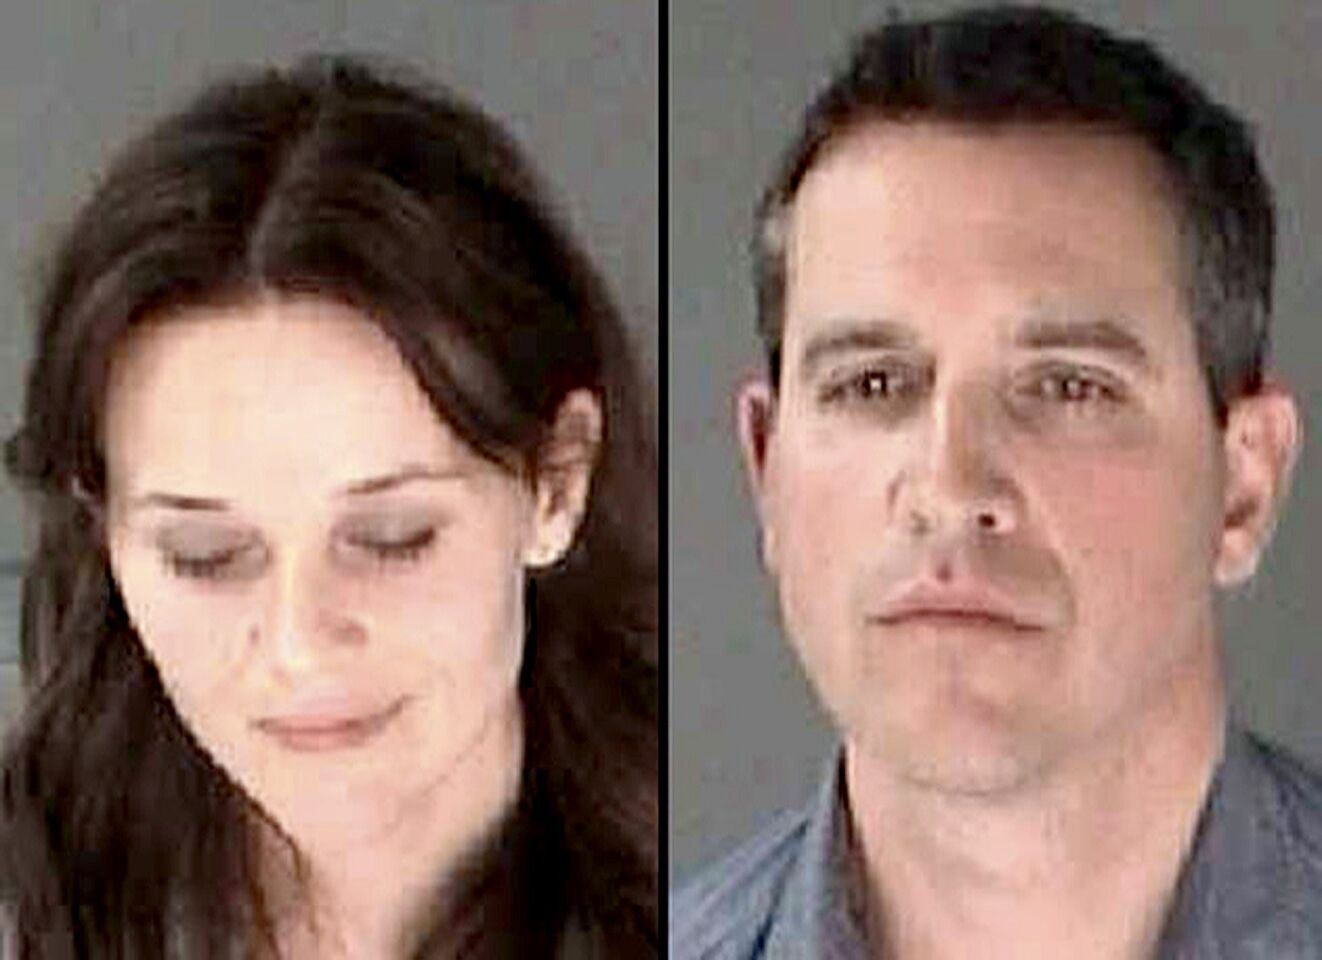 Oscar-winning actress Reese Witherspoon became agitated after her husband, CAA agent Jim Toth, was arrested on suspicion of driving under the influence in Atlanta on April 19, 2013, officials said. Witherspoon was subsequently arrested for disorderly conduct.